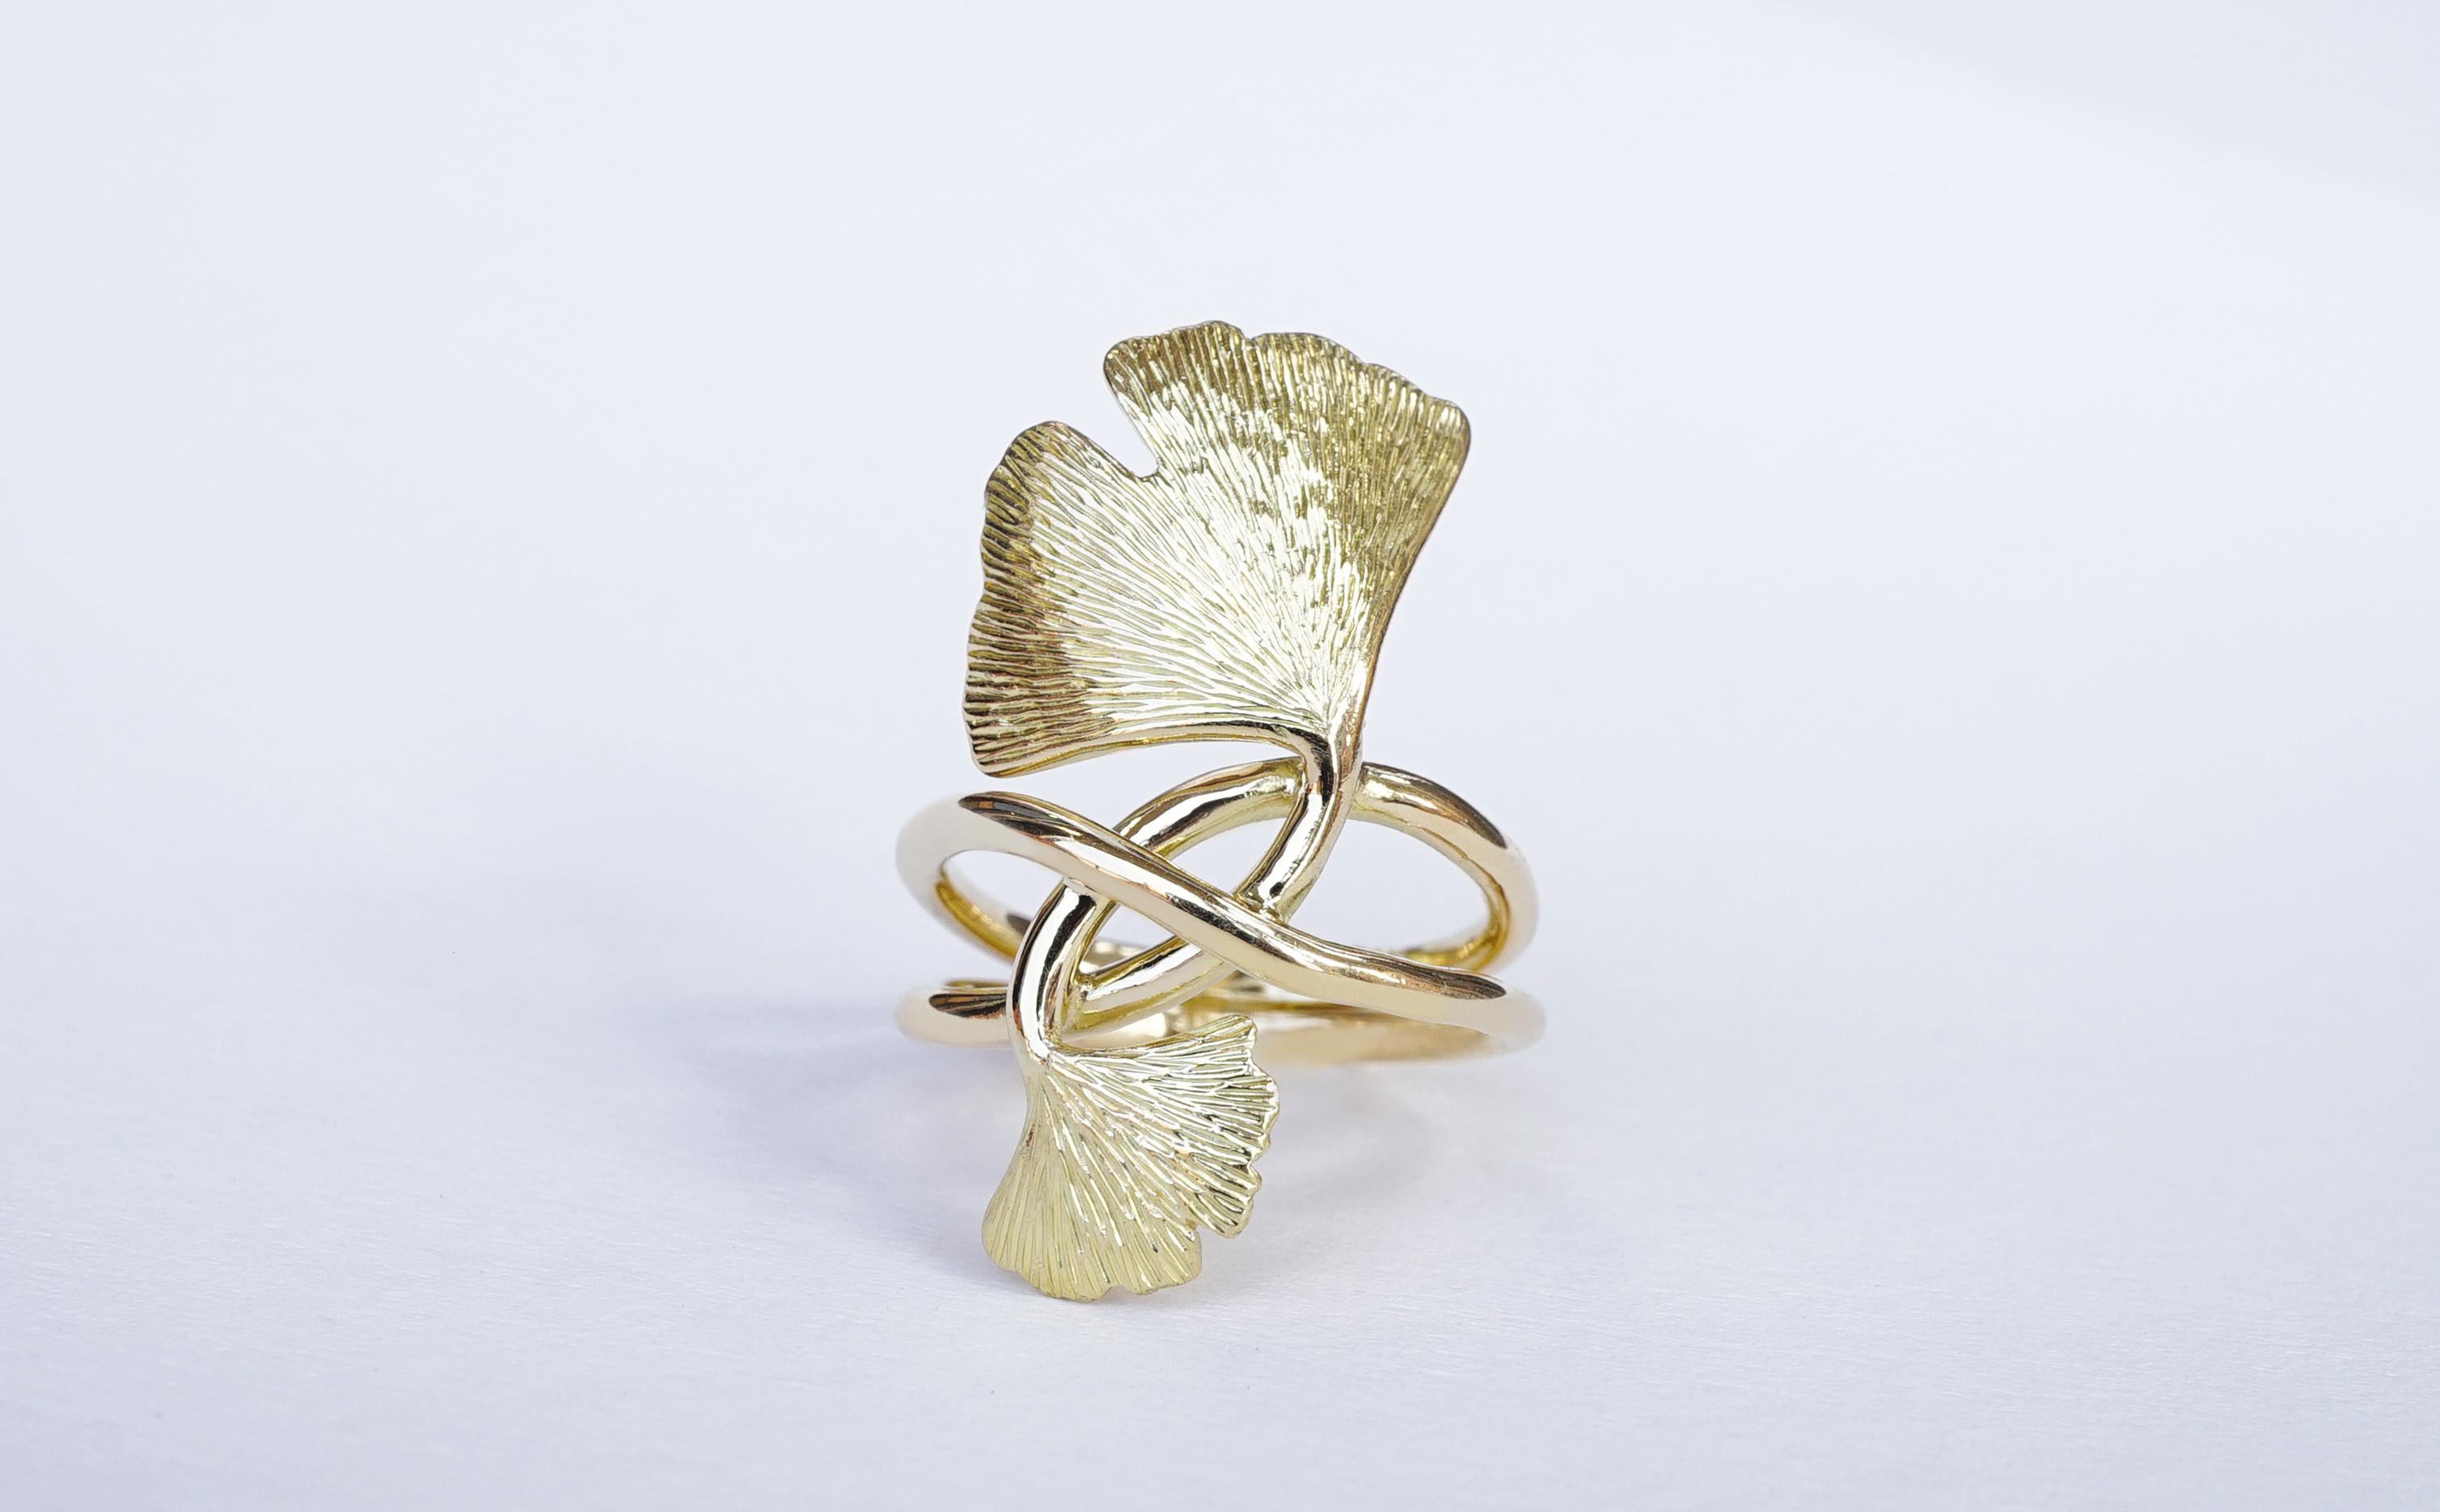 Coralie Van Caloen 18k Gold Gingko Ring is entirely hand made and forged in Belgium by experts goldsmiths therefore it is a very unique piece. The gingko leaves twist around the finger to form an elegant band ring. The leaves are hand engraved in